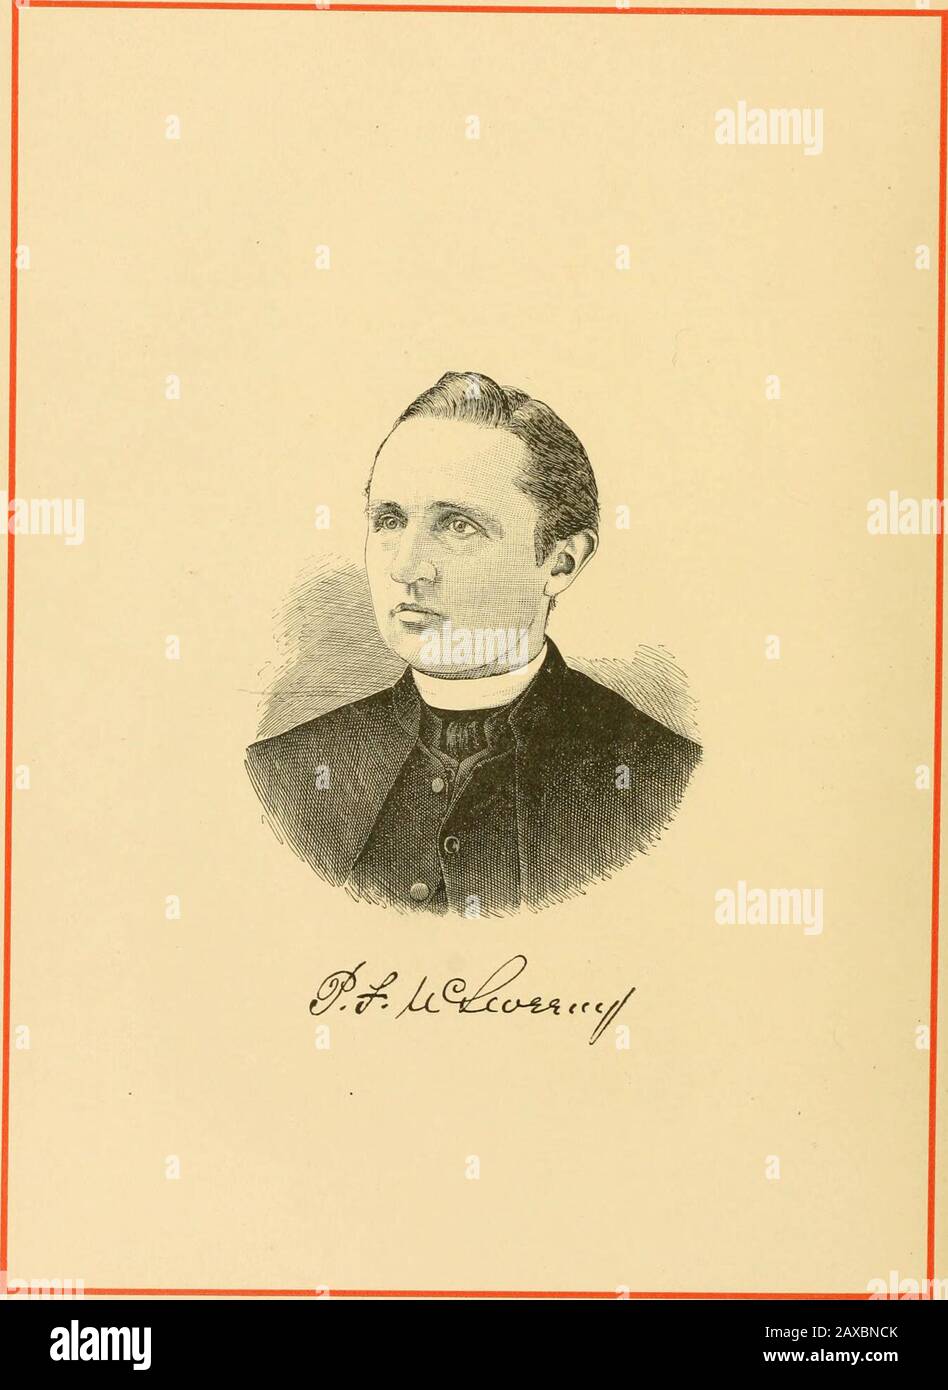 The Catholic churches of New York City, with sketches of their history and lives of the present pastors : with an introduction on the early history of Catholicity on the island, and lives of the most reverend archbishops and bishops . (Jwen.Masterson, P.Miner, Jane, Mrs. Monaghan, Matthew.Monks, John.Moore, Patrick H.Moynih.an, Edward.Mulcown, Robert.Mulgrew, Felix A.Mullen, Mary, Mrs.Mulligan, Margaret, Mrs.Midligan, Michael.Mundy, Neil.Murphy, Daniel.Murphy, F. W.Murphy, Margaret, Mrs.Murphy, Michael.Nash, Thomas.Nugent, Kliza.Nugent, Tliomas A.OBrien, Edward.OBrien, M.OConnell, Adelia.OConn Stock Photo